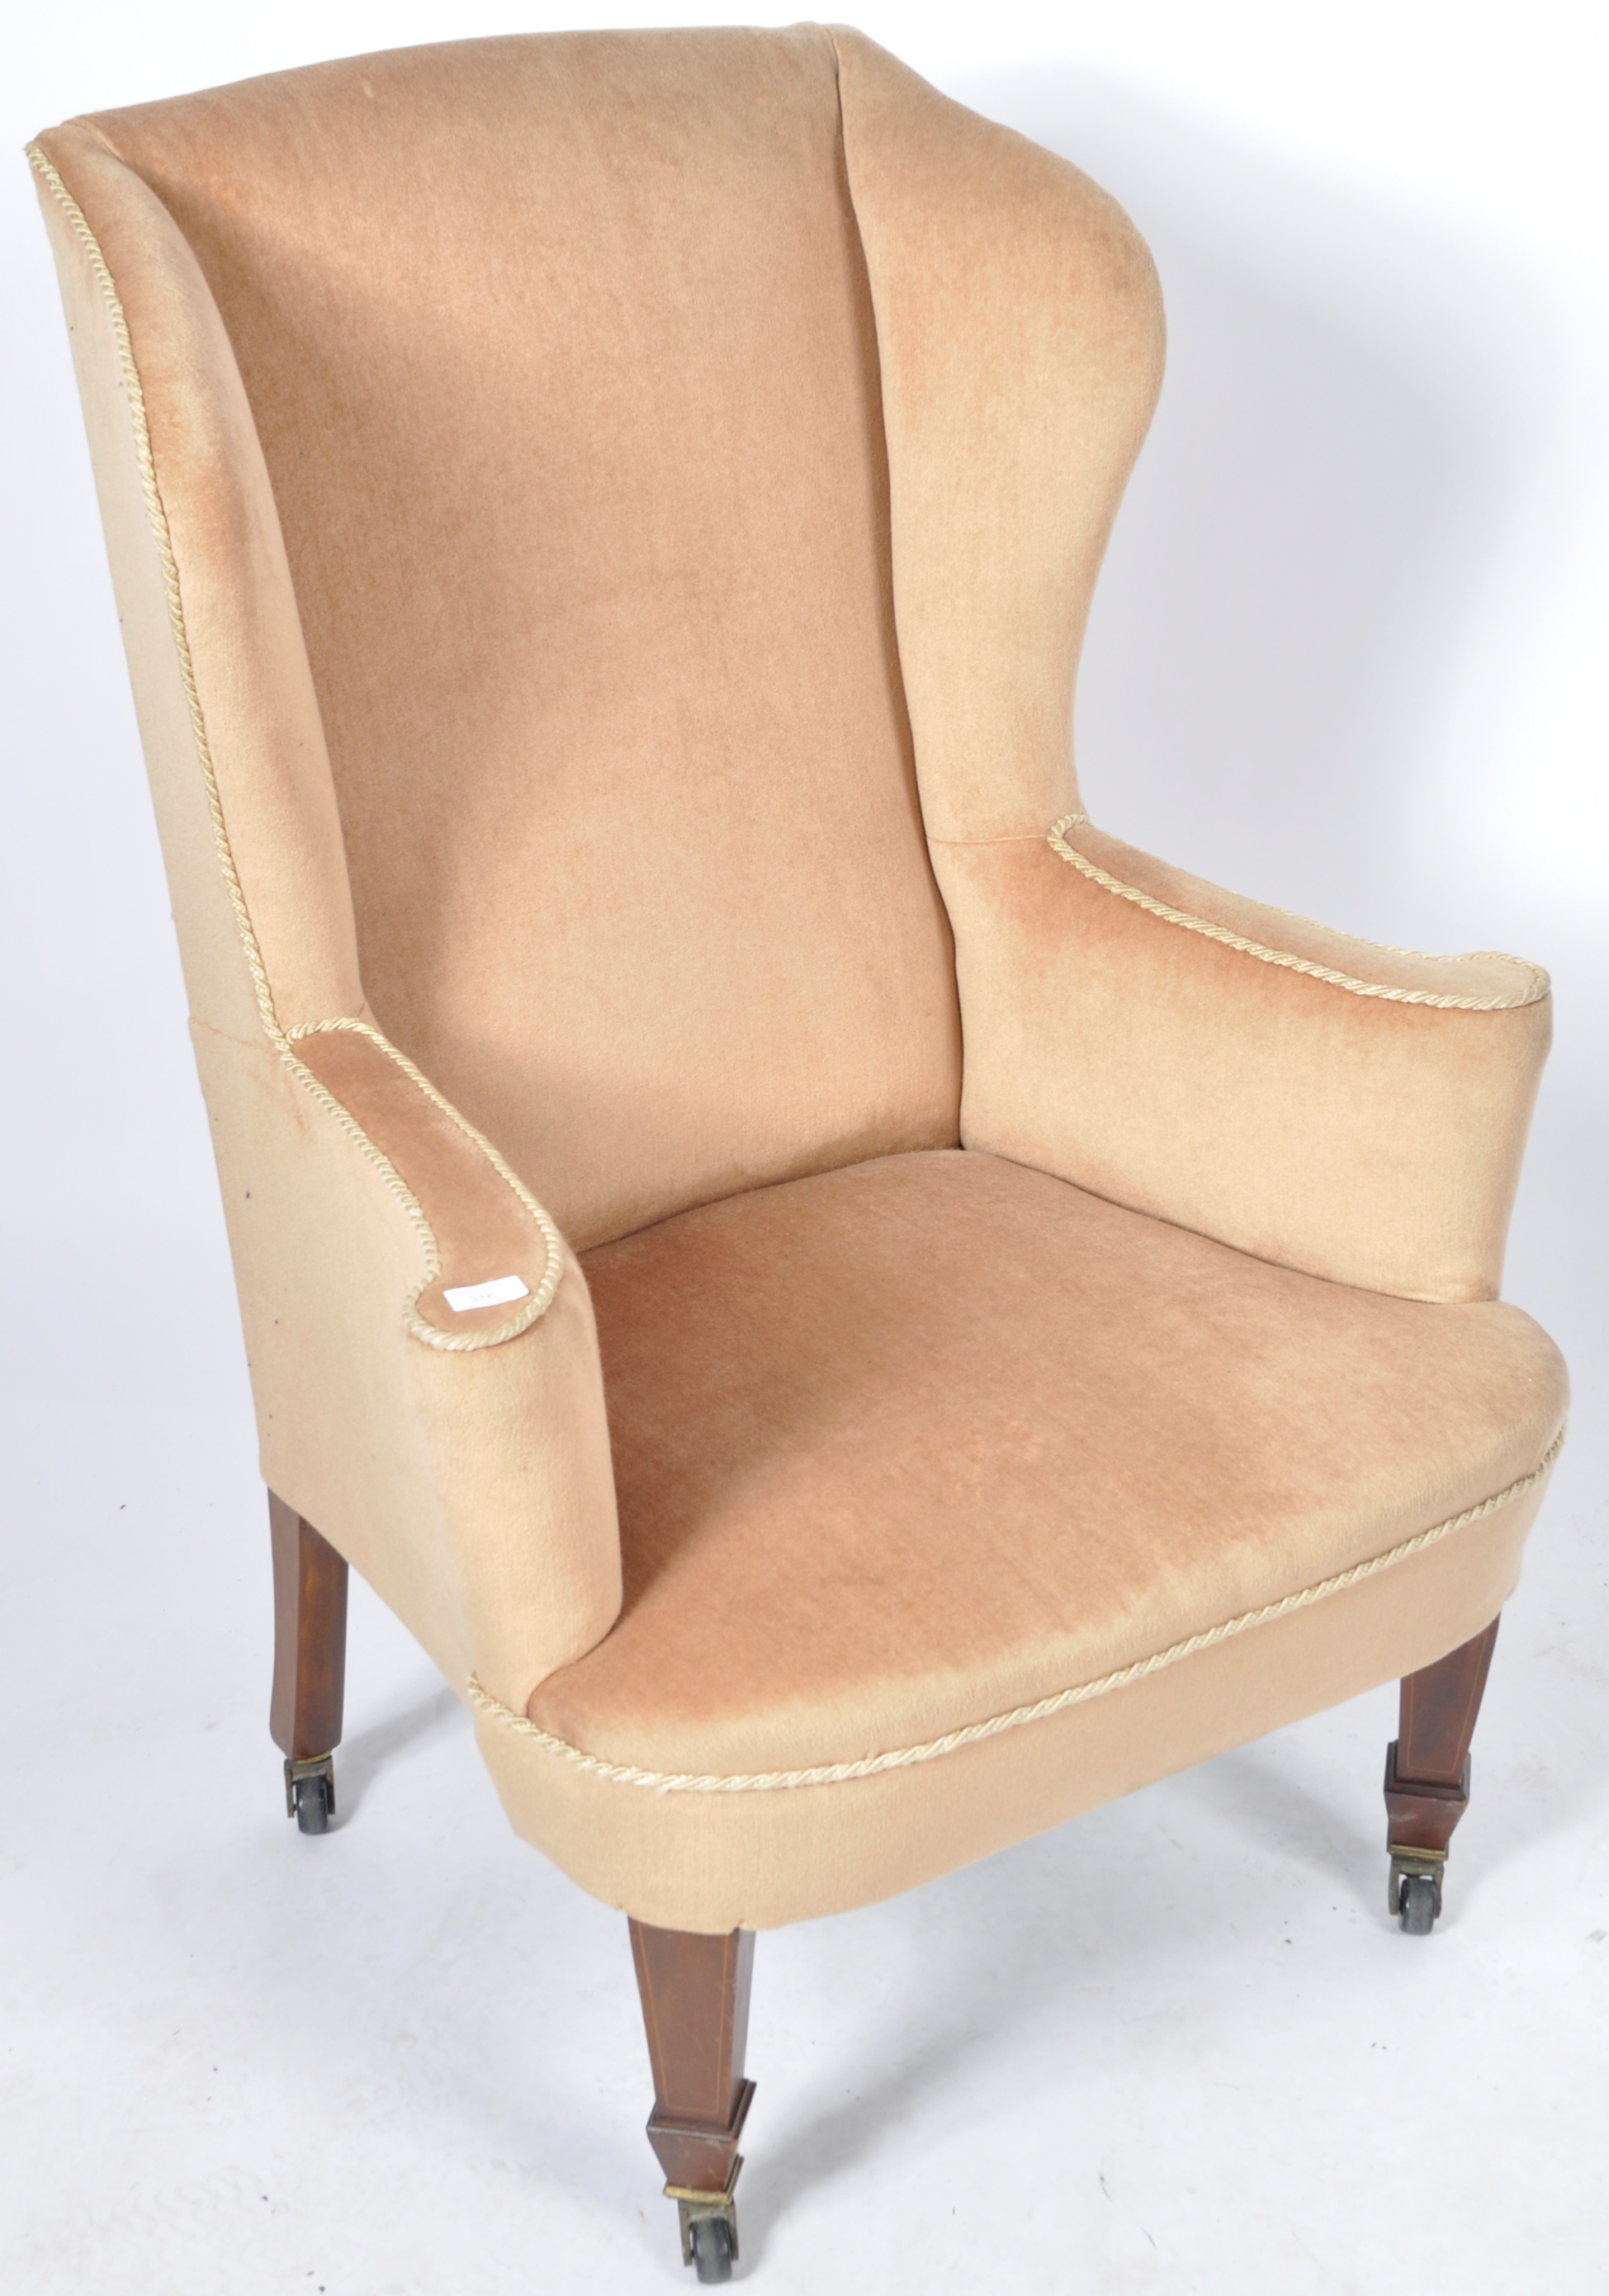 ANTIQUE 19TH CENTURY WINGBACK FIRESIDE ARMCHAIR - Image 2 of 7